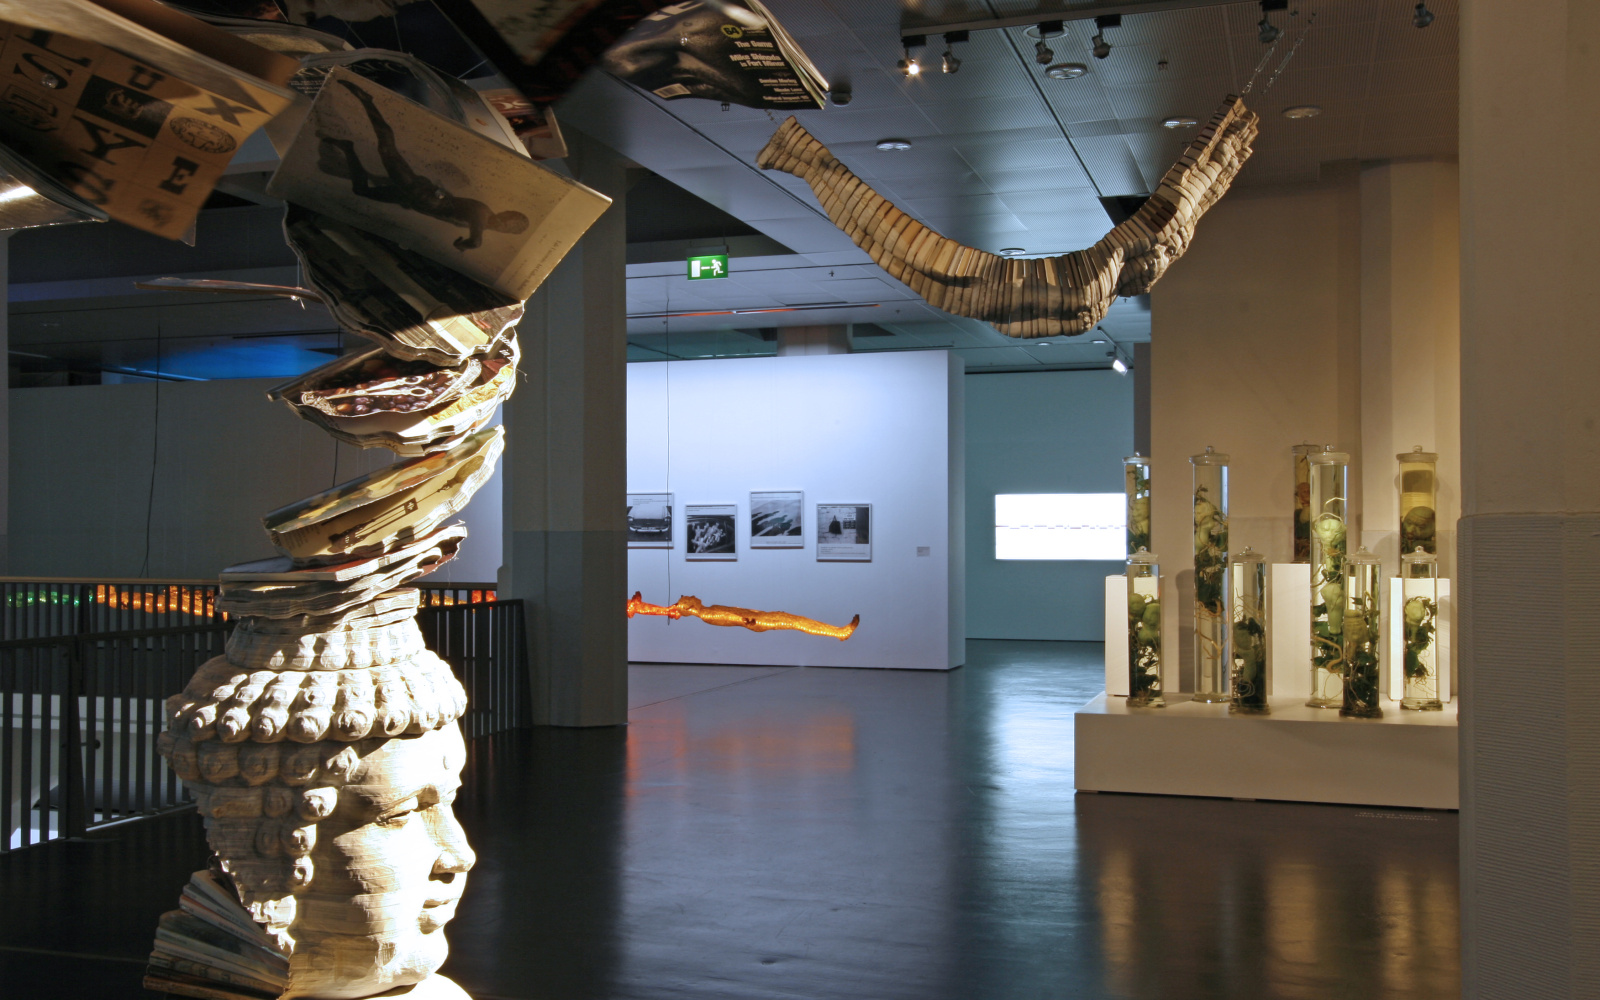 Exhibition view "Thermocline of Art"